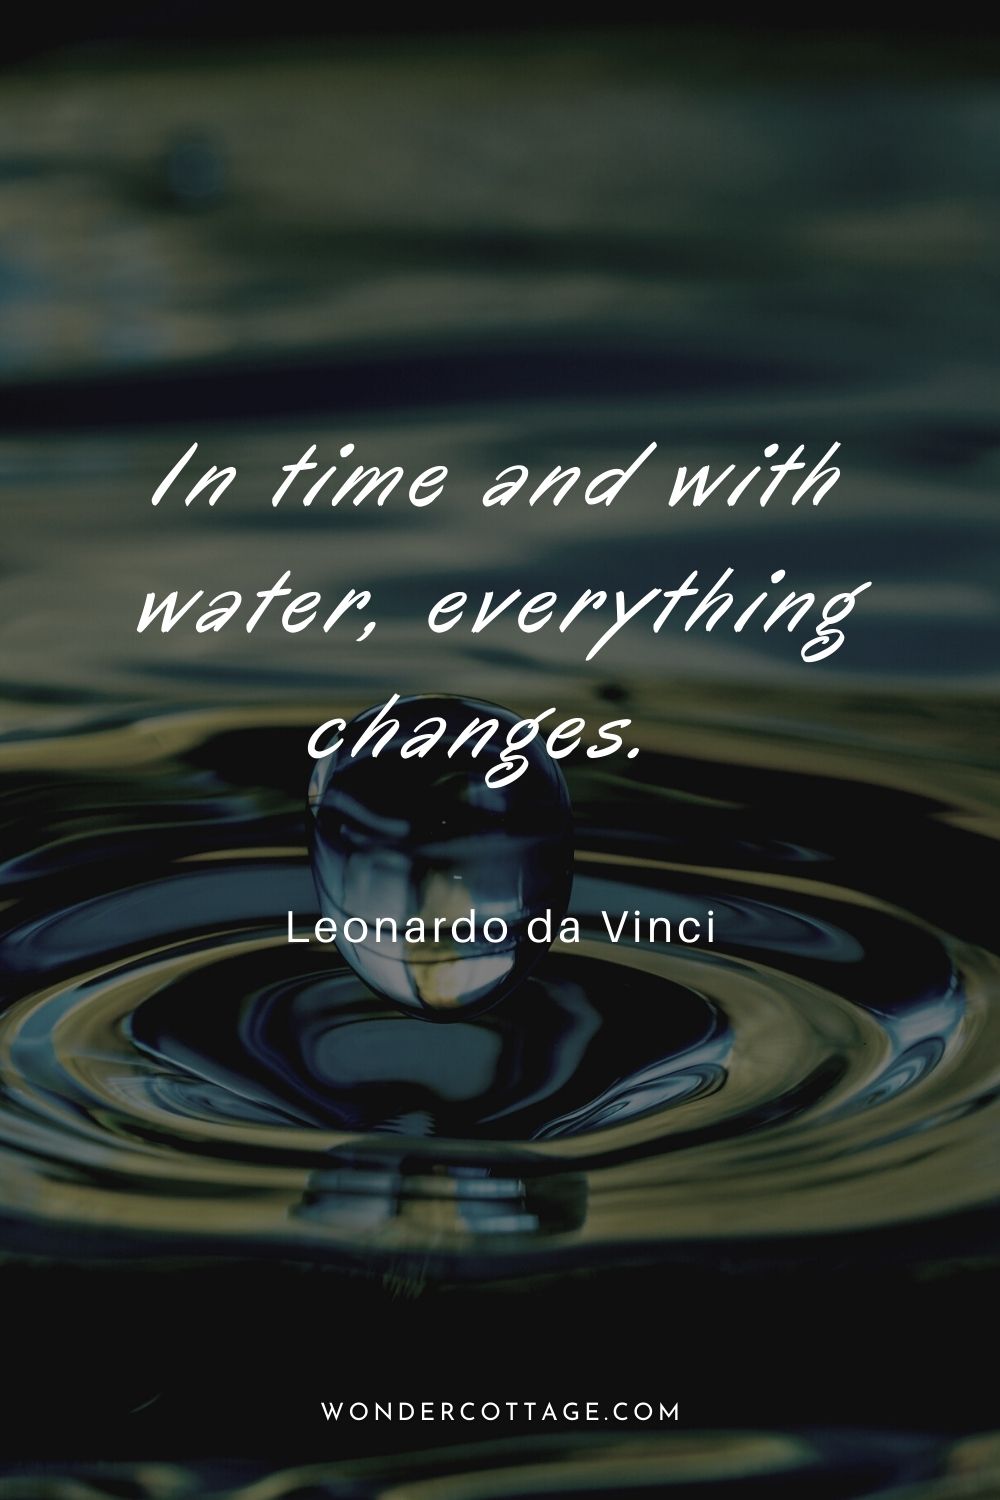 In time and with water, everything changes. Leonardo da Vinci